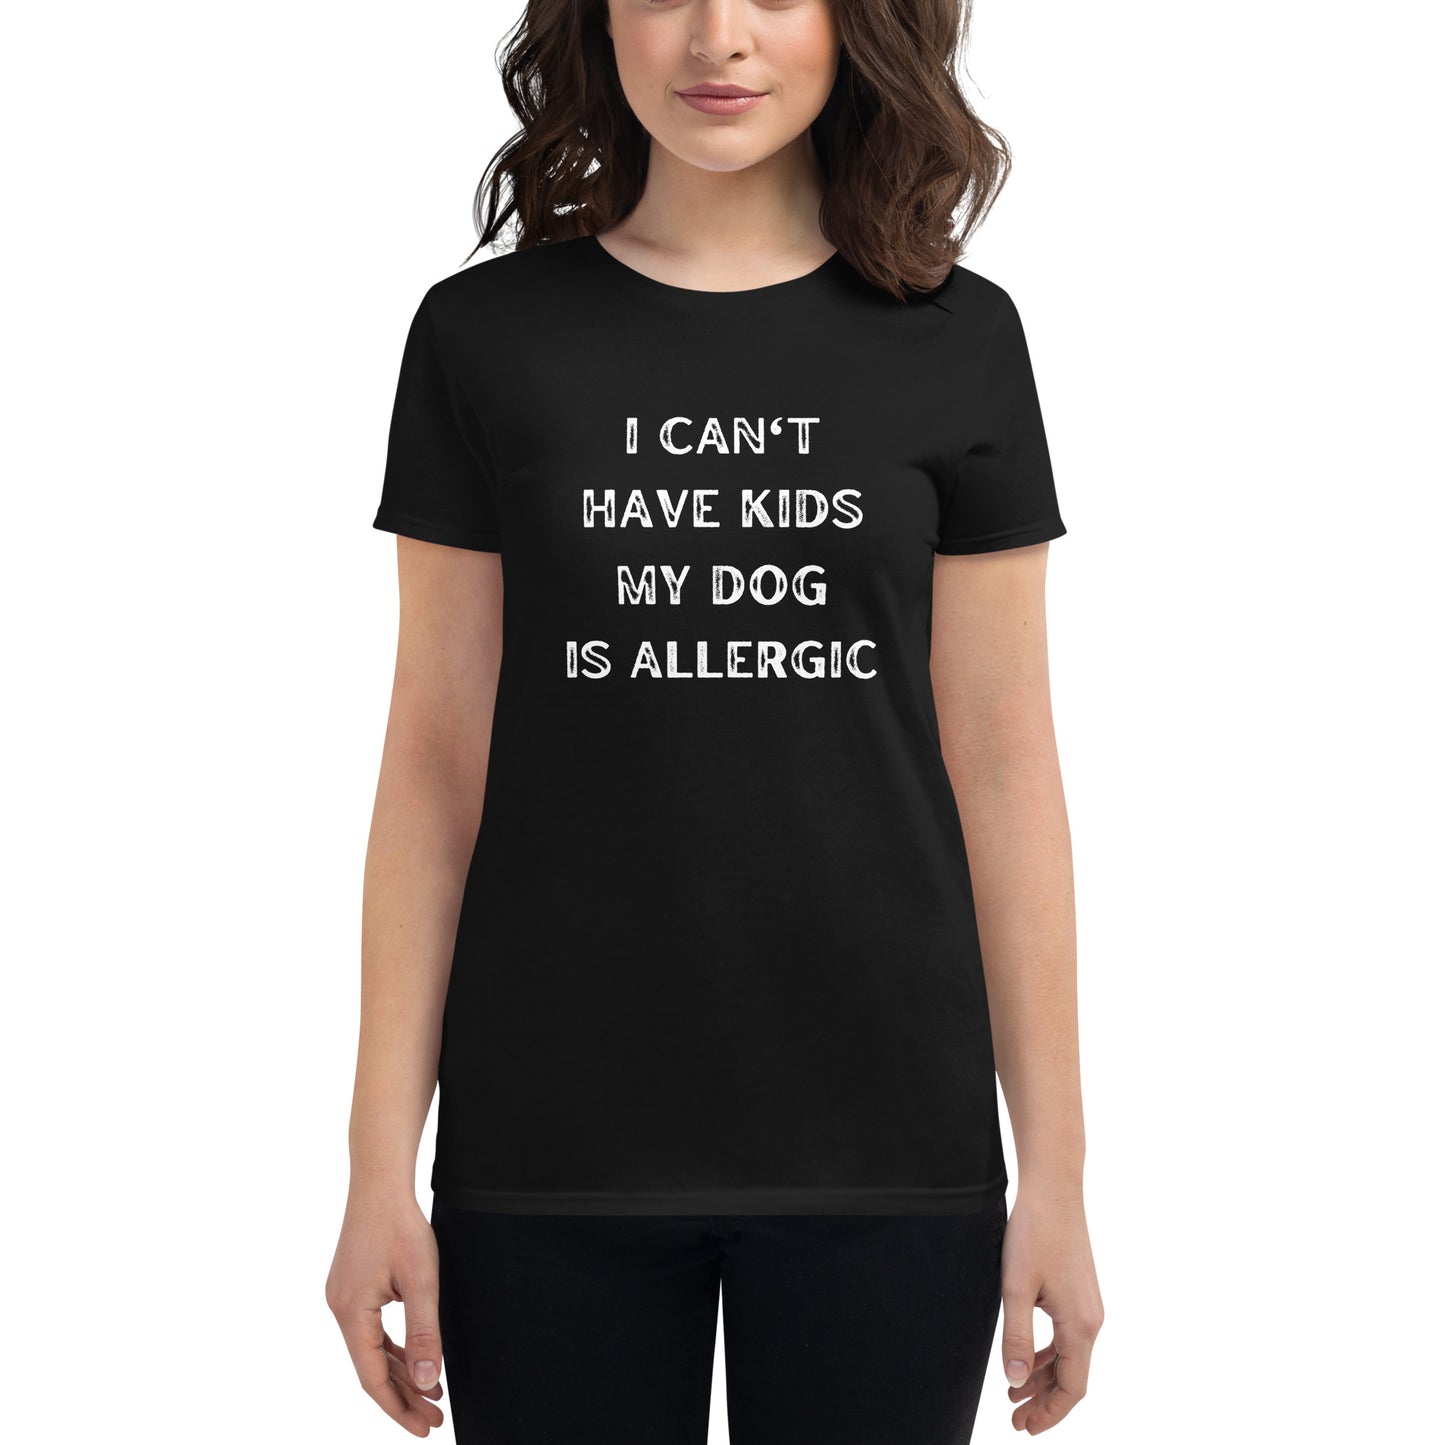 I Can't Have Kids My Dog is Allergic Women's short sleeve t-shirt